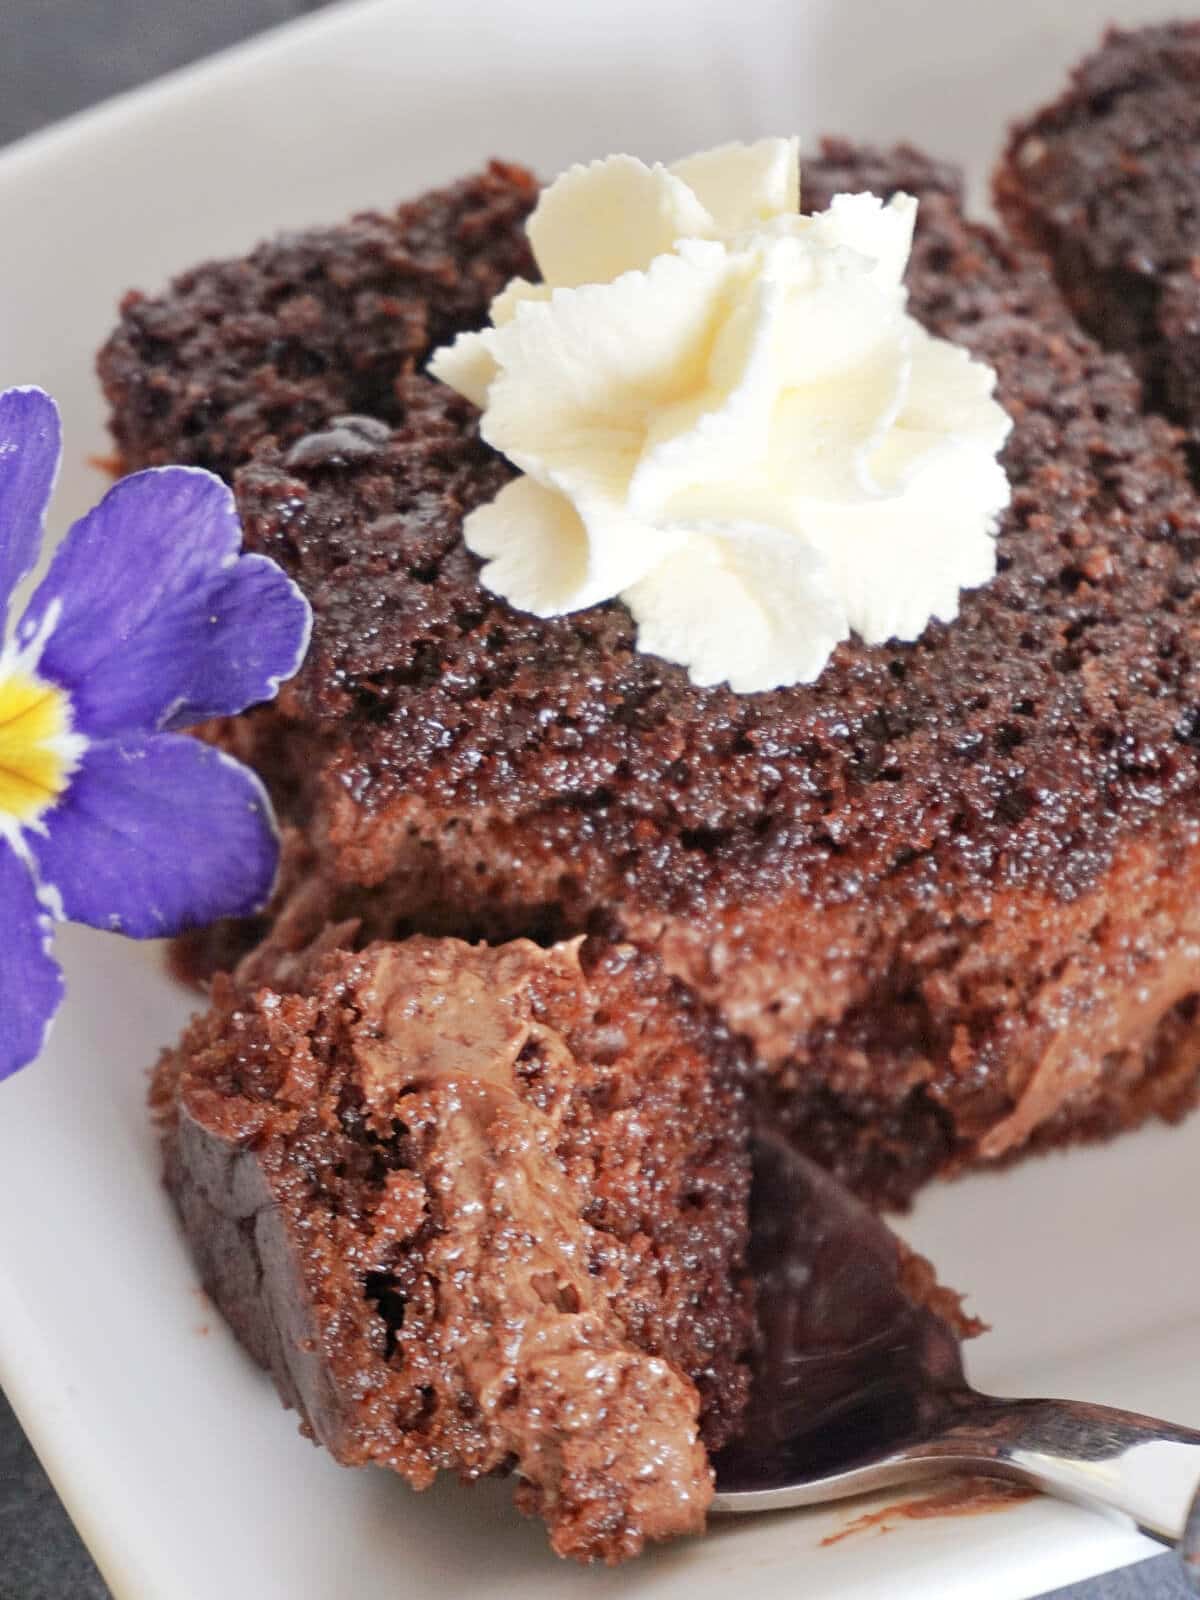 Close-up shot of a slice of chocolate and nutella cake